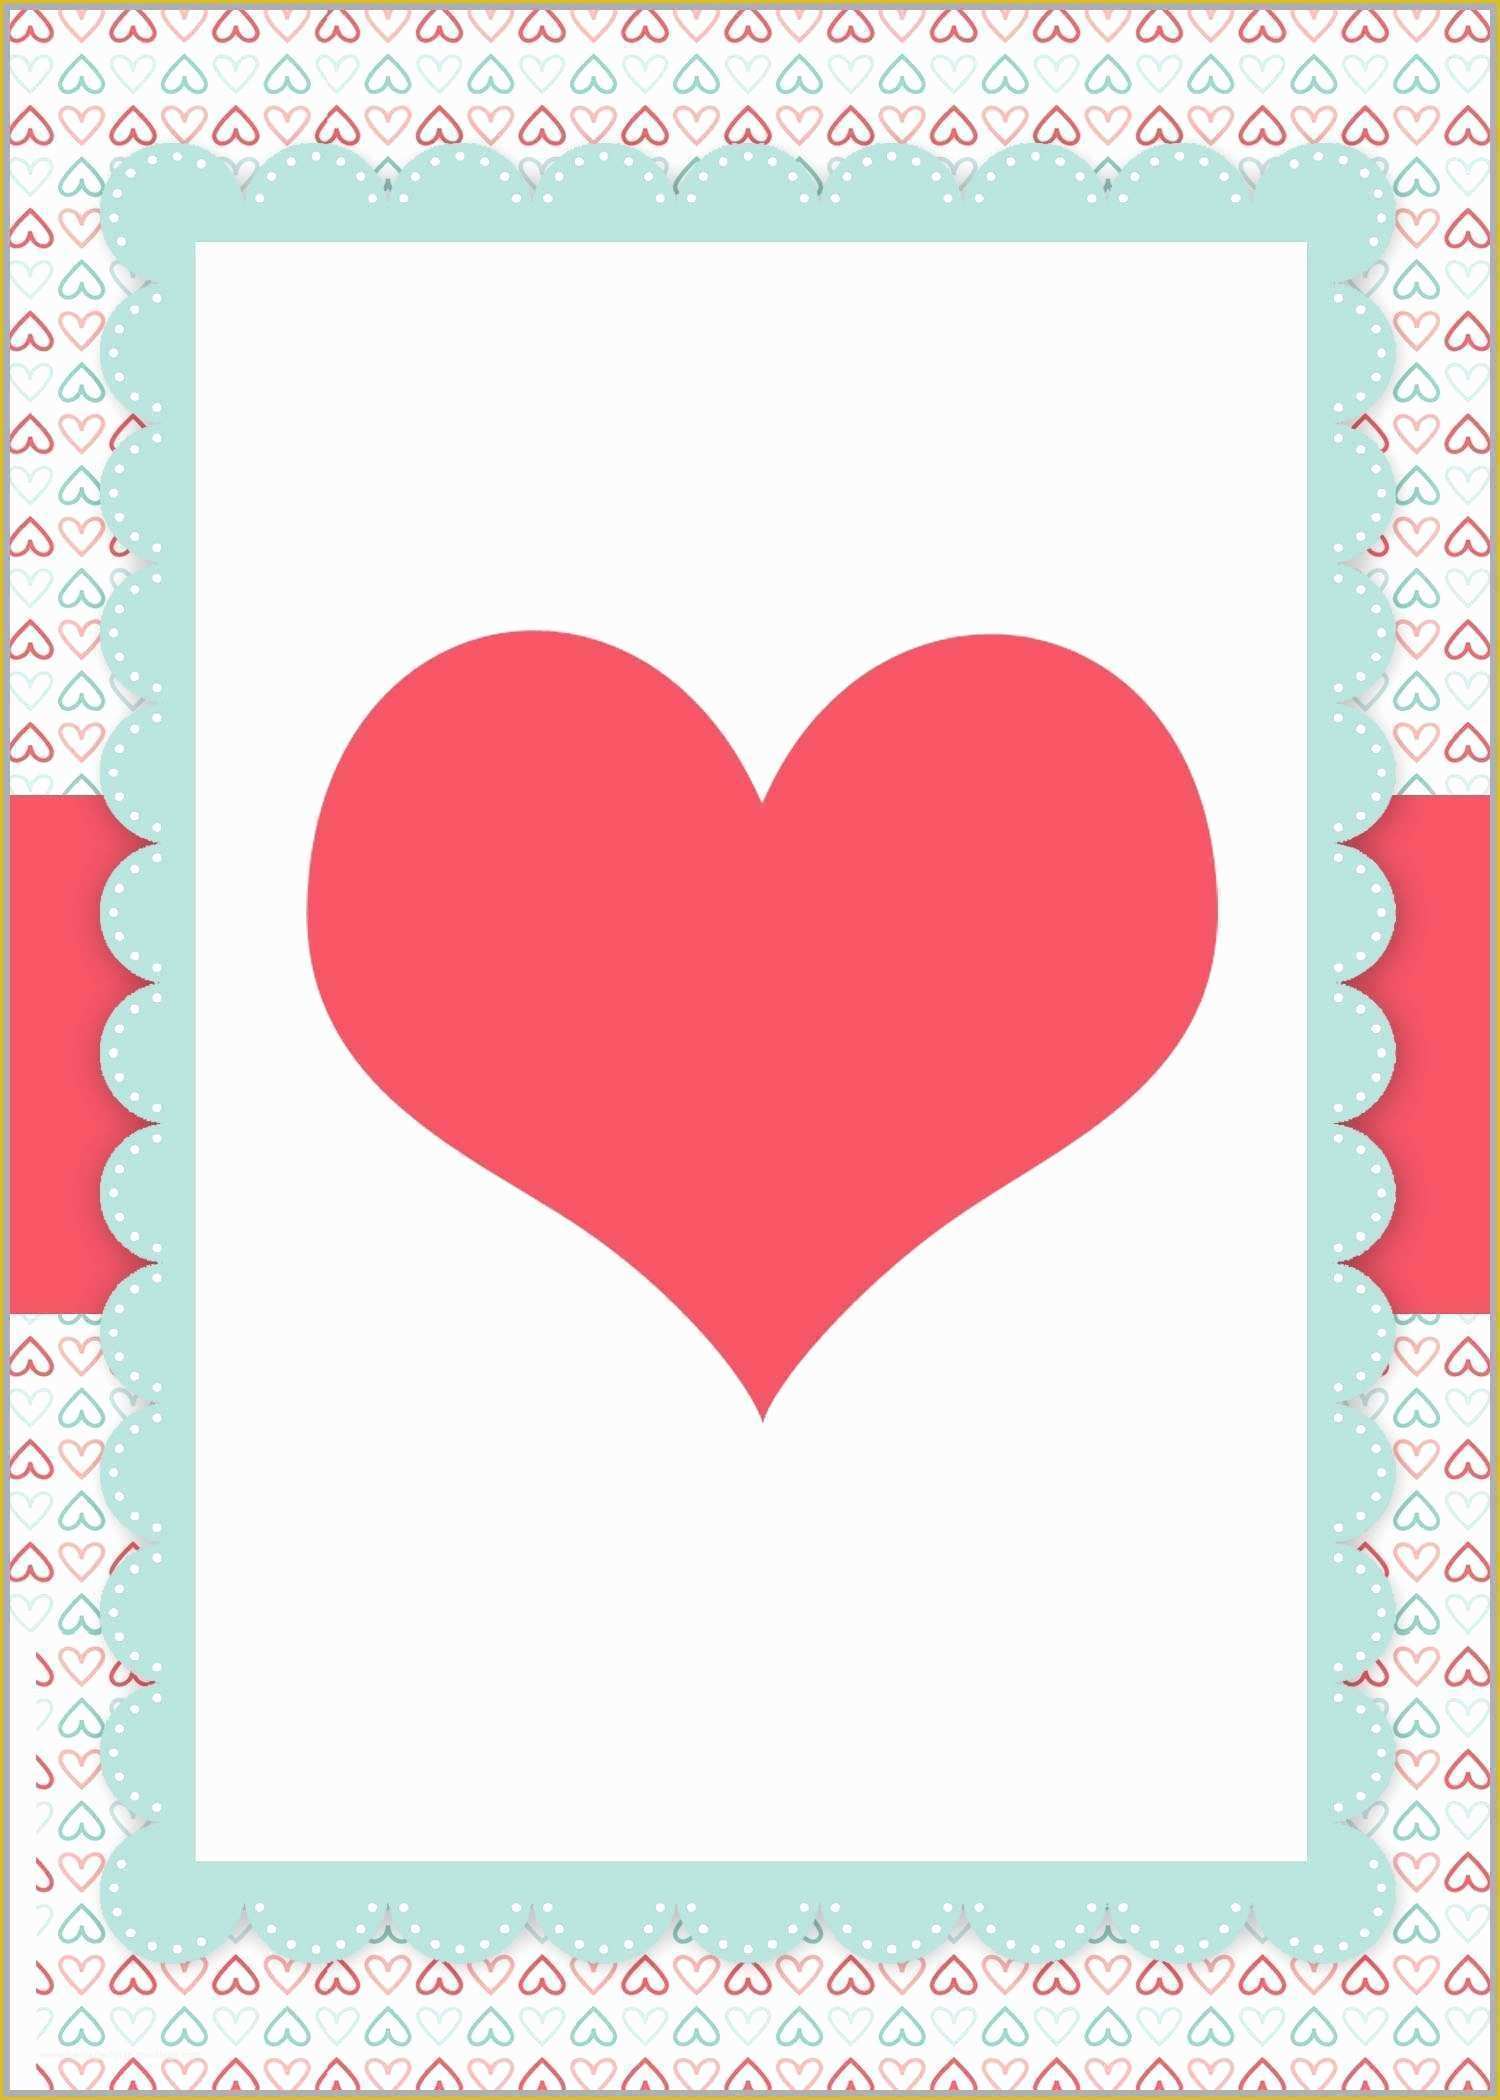 free-printable-note-cards-template-of-14-days-of-free-valentine-s-printables-day-3